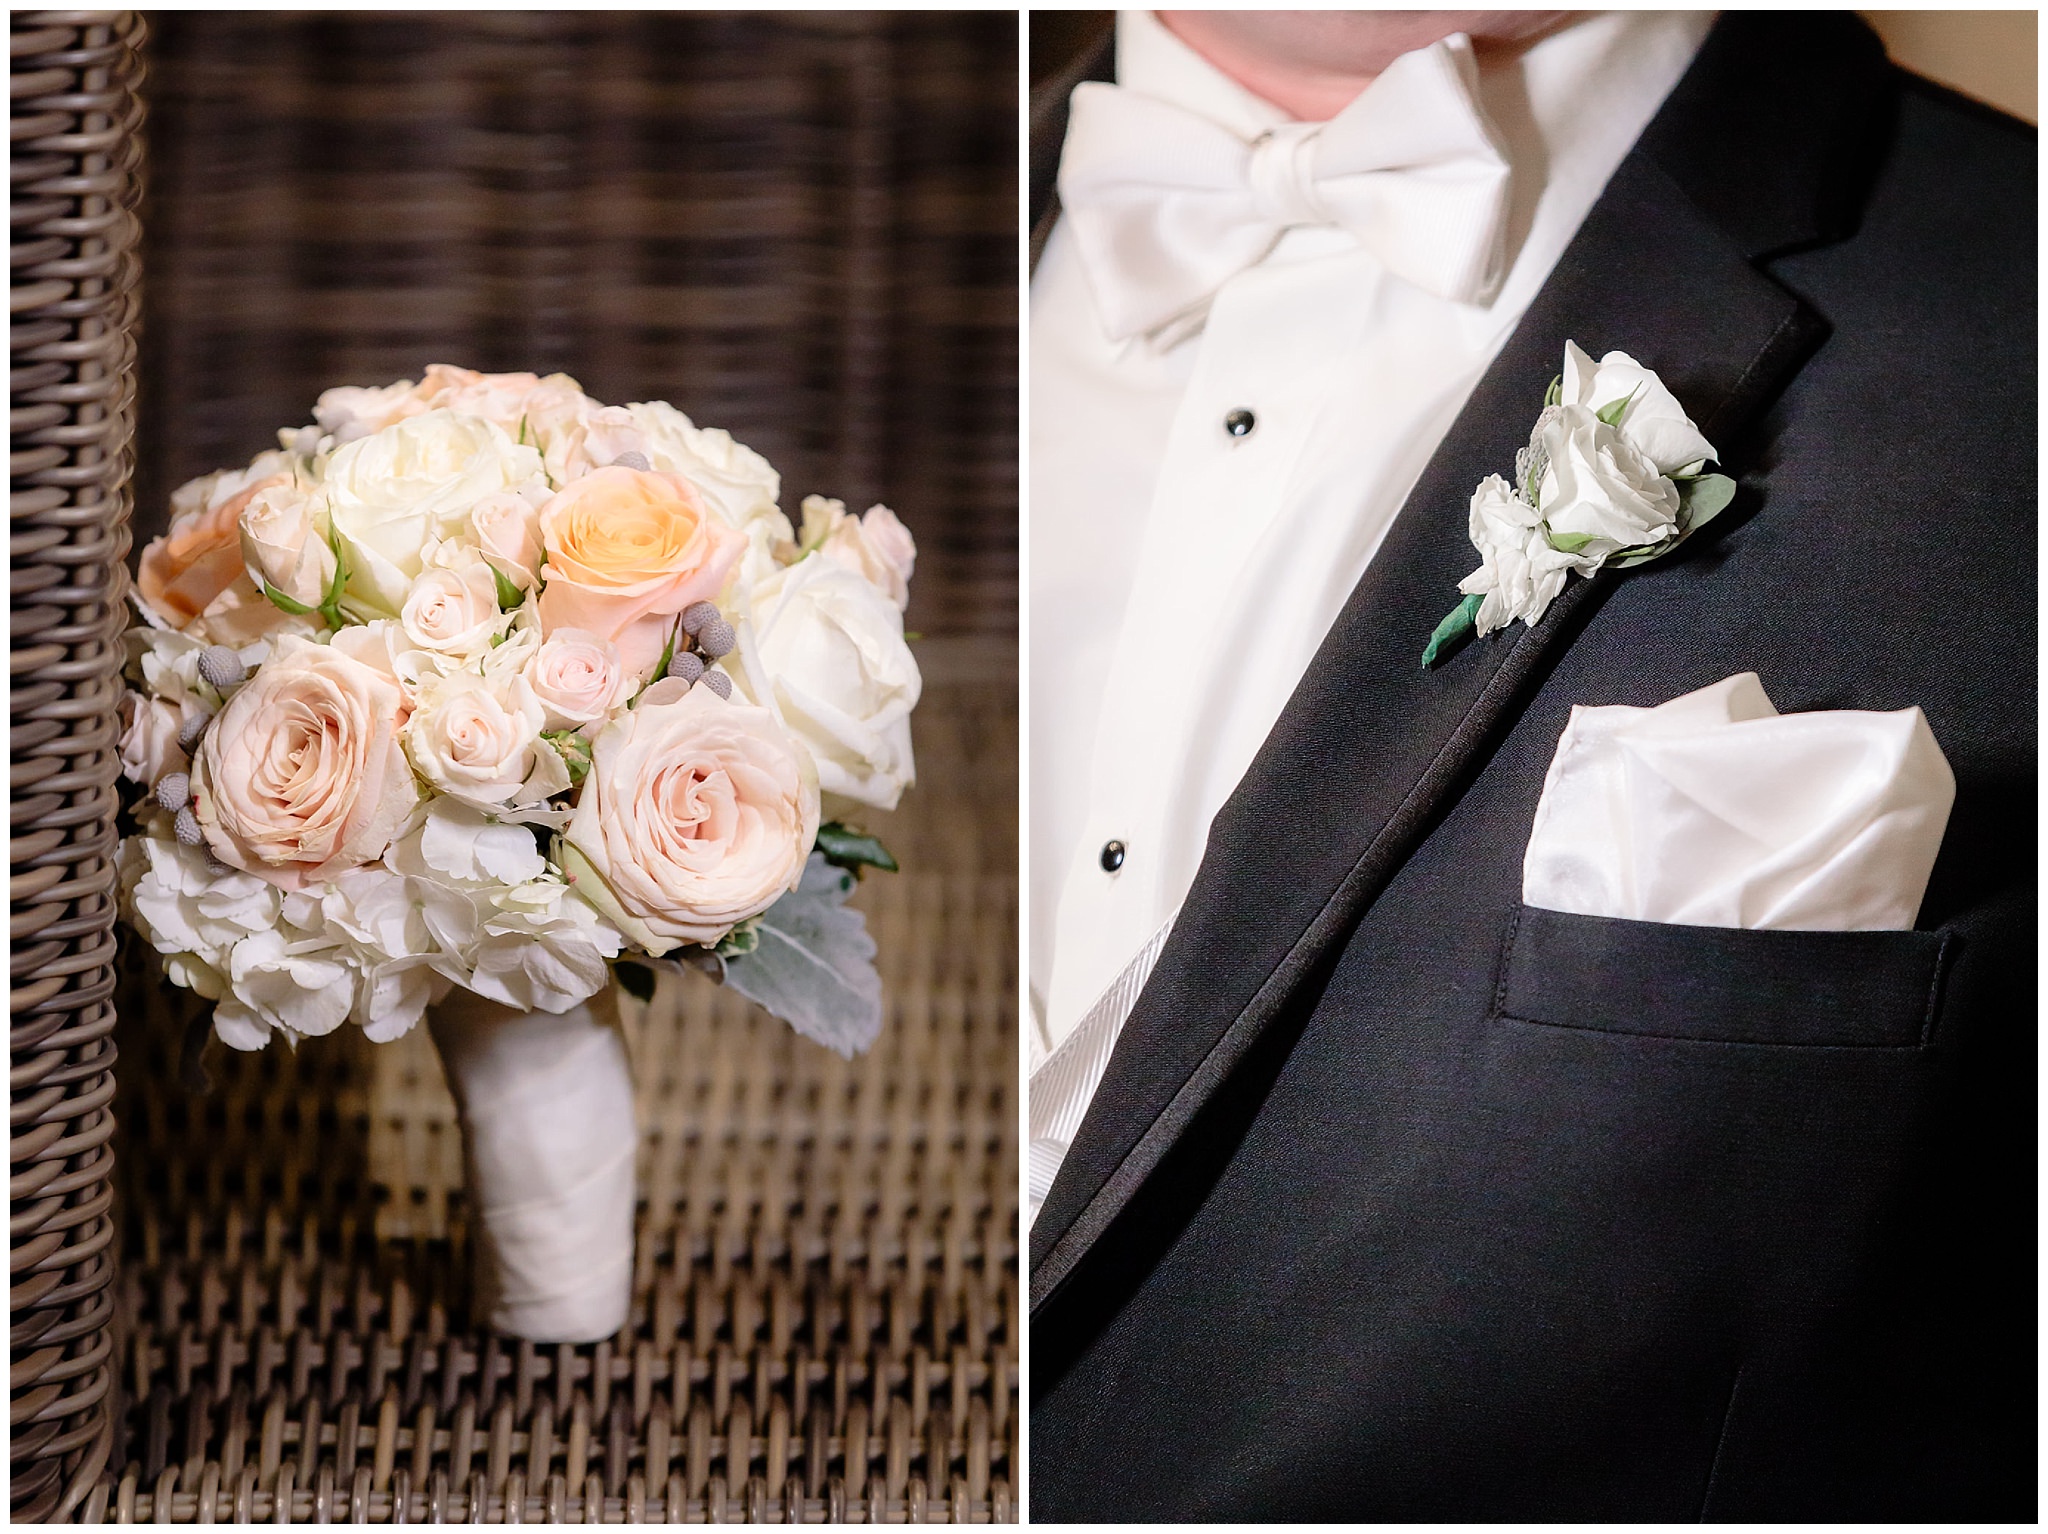 Bride's bouquet and groom's boutonniere by Hepatica in Pittsburgh, PA